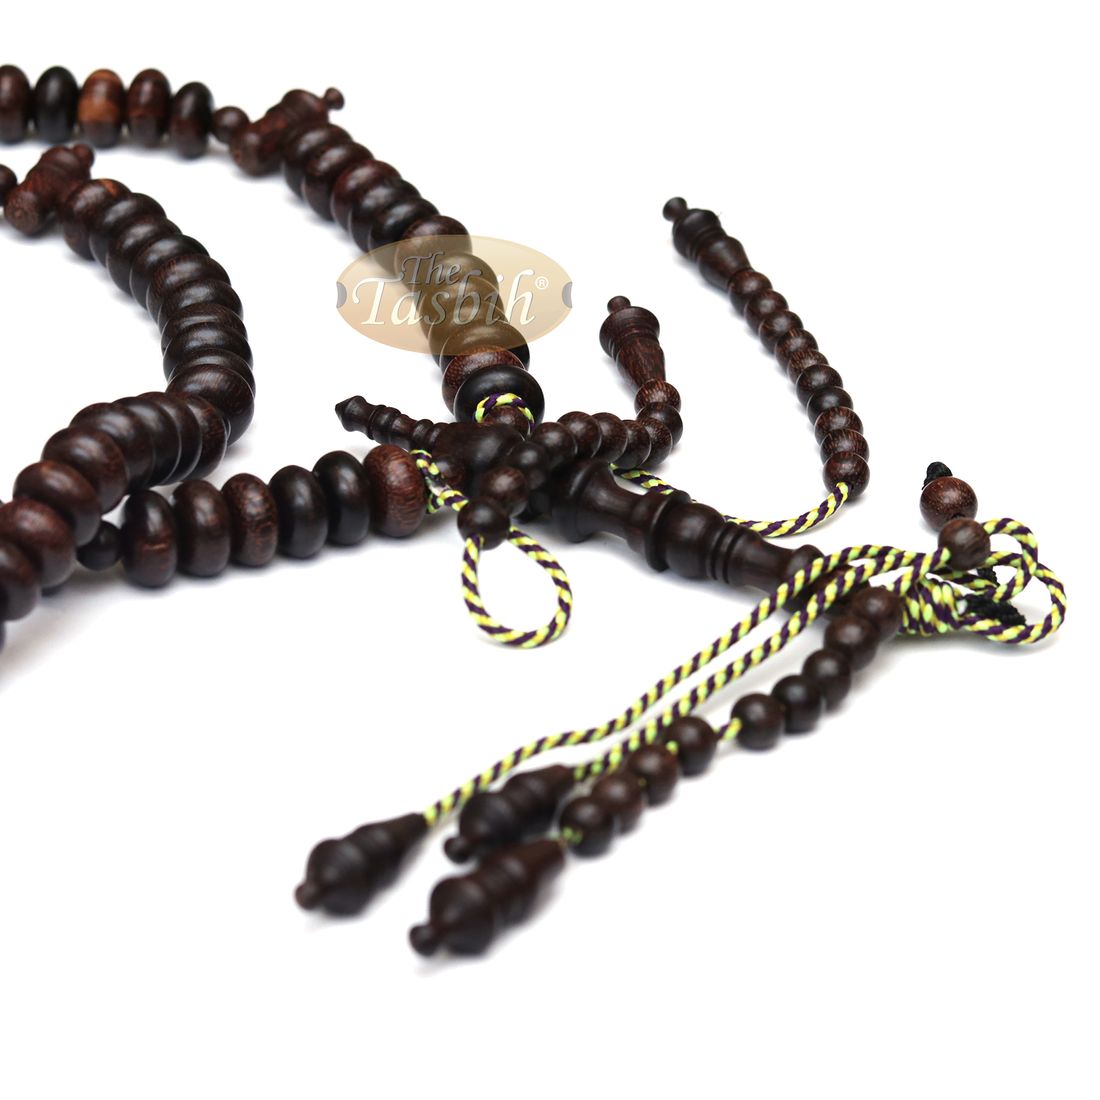 LIMITED EDITION Tijani Tariqah Dhikr Tasbih Muslim Prayer Beads 12x7mm Oval Beads from Tamarind Wood – Handcarved Alif Dividers in Gift Box